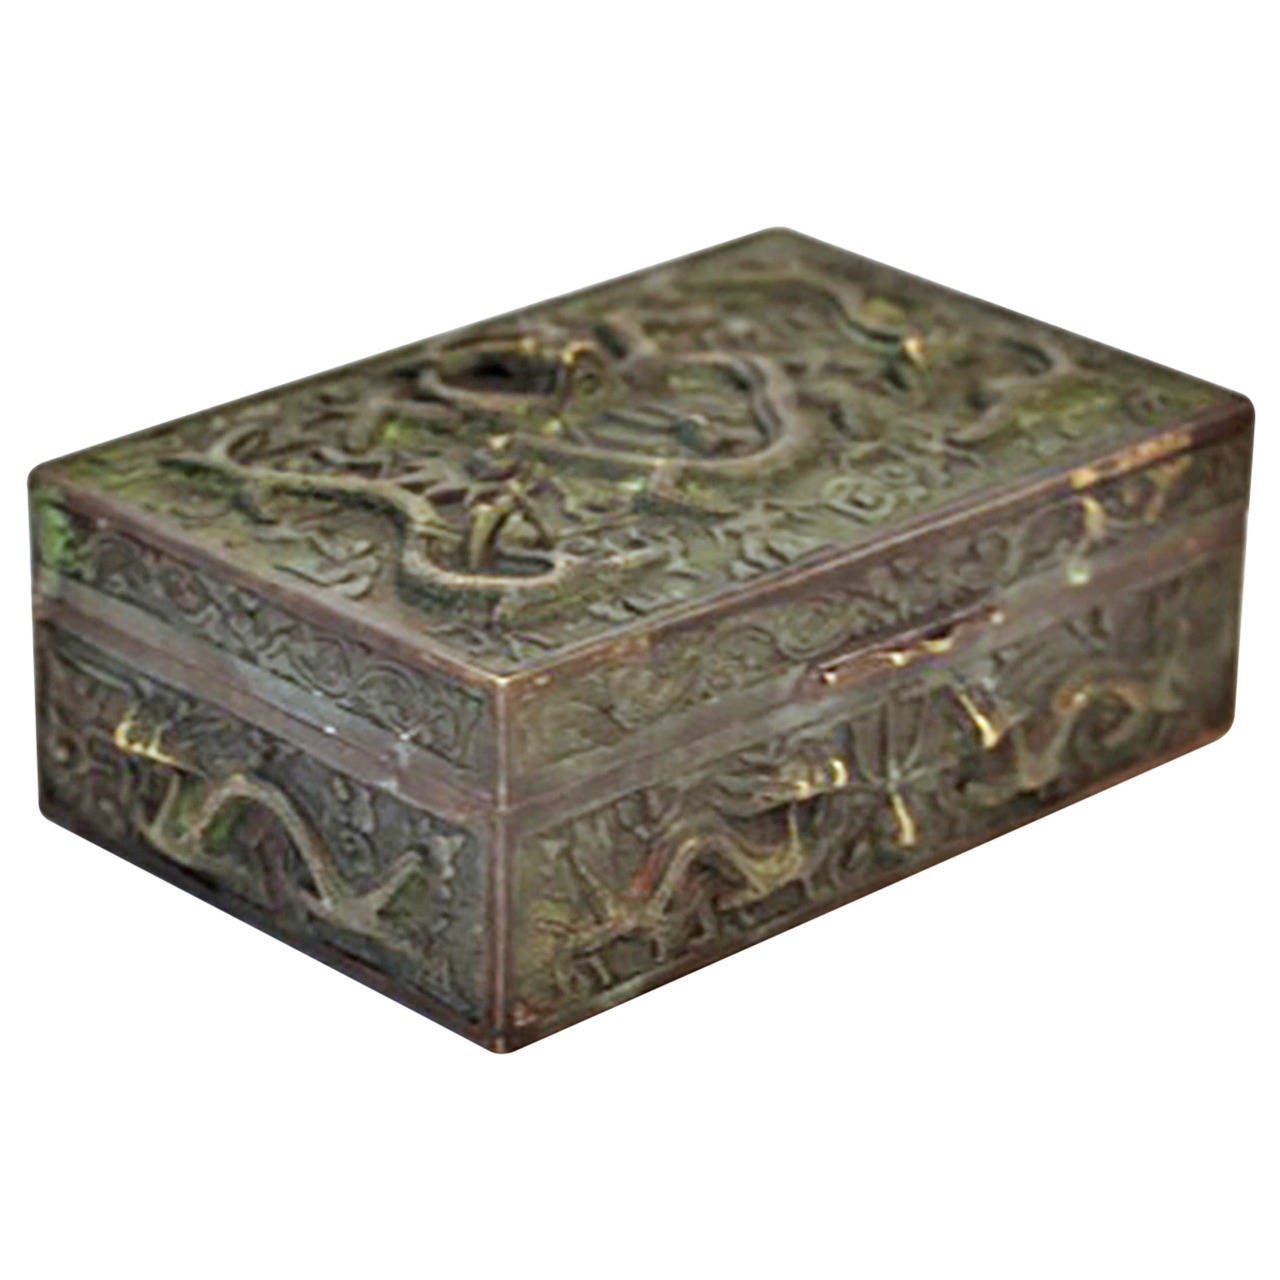 An early 20th century copper box with a striking design of nine flying dragons, each in relief with four outstretched claws, horns, whiskers and sinuous bodies. Circa 1920. 

The lid of the rectangular brass box has three dragons including one